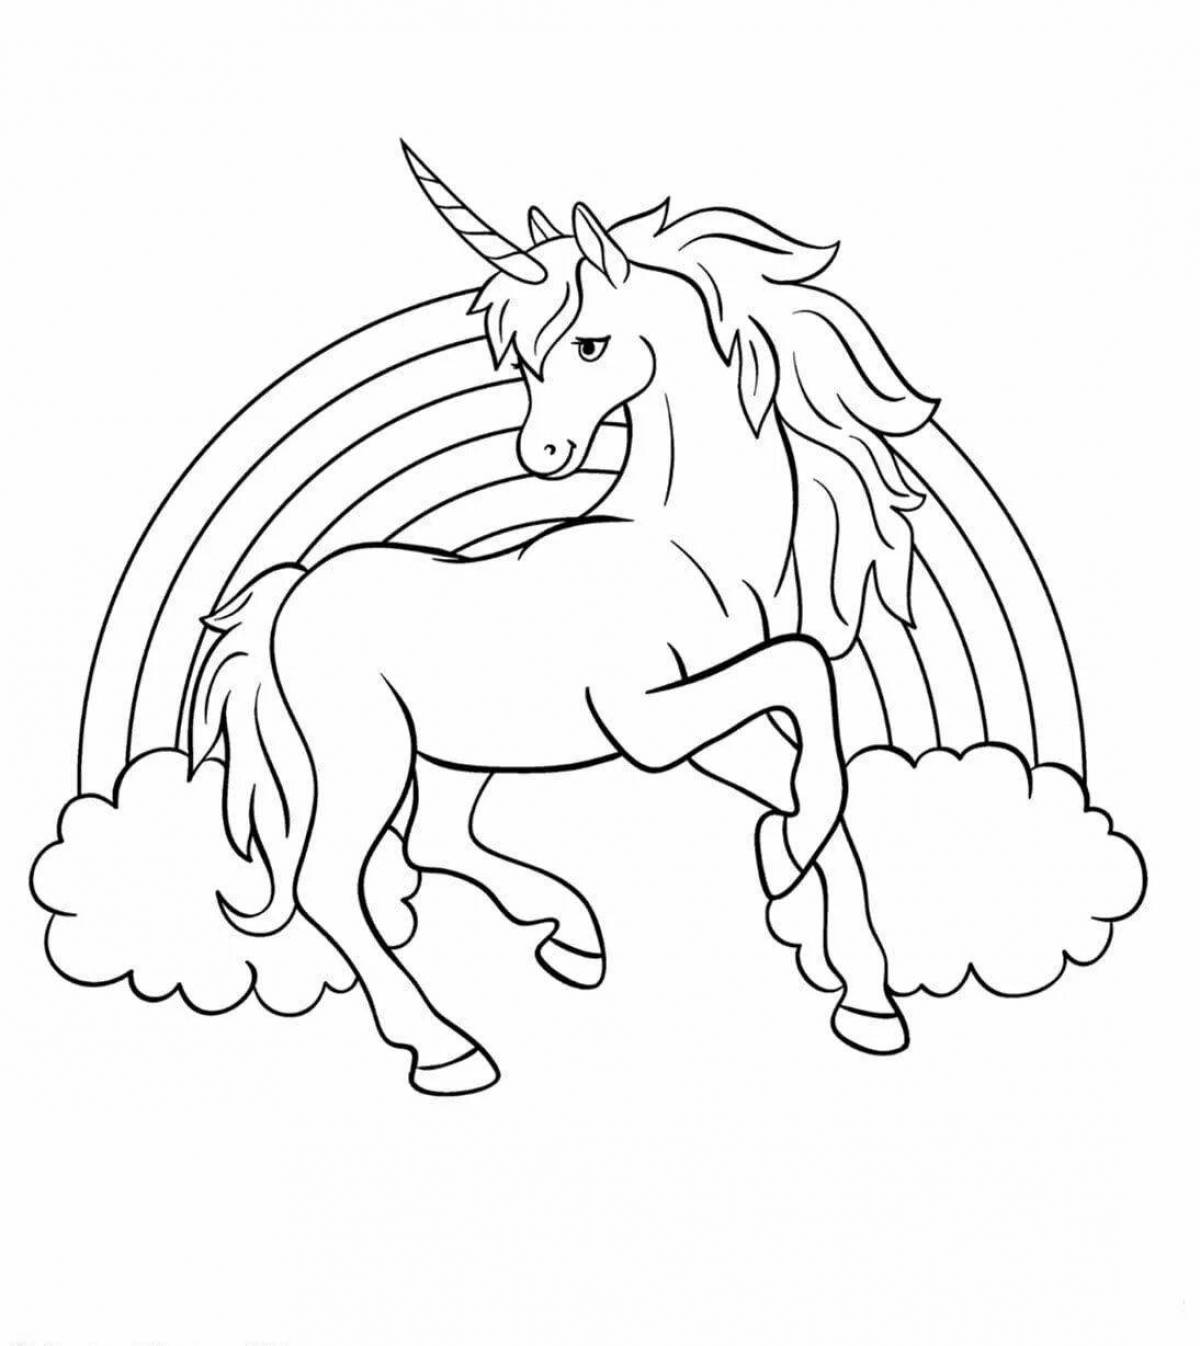 Awesome unicorn drawing for kids